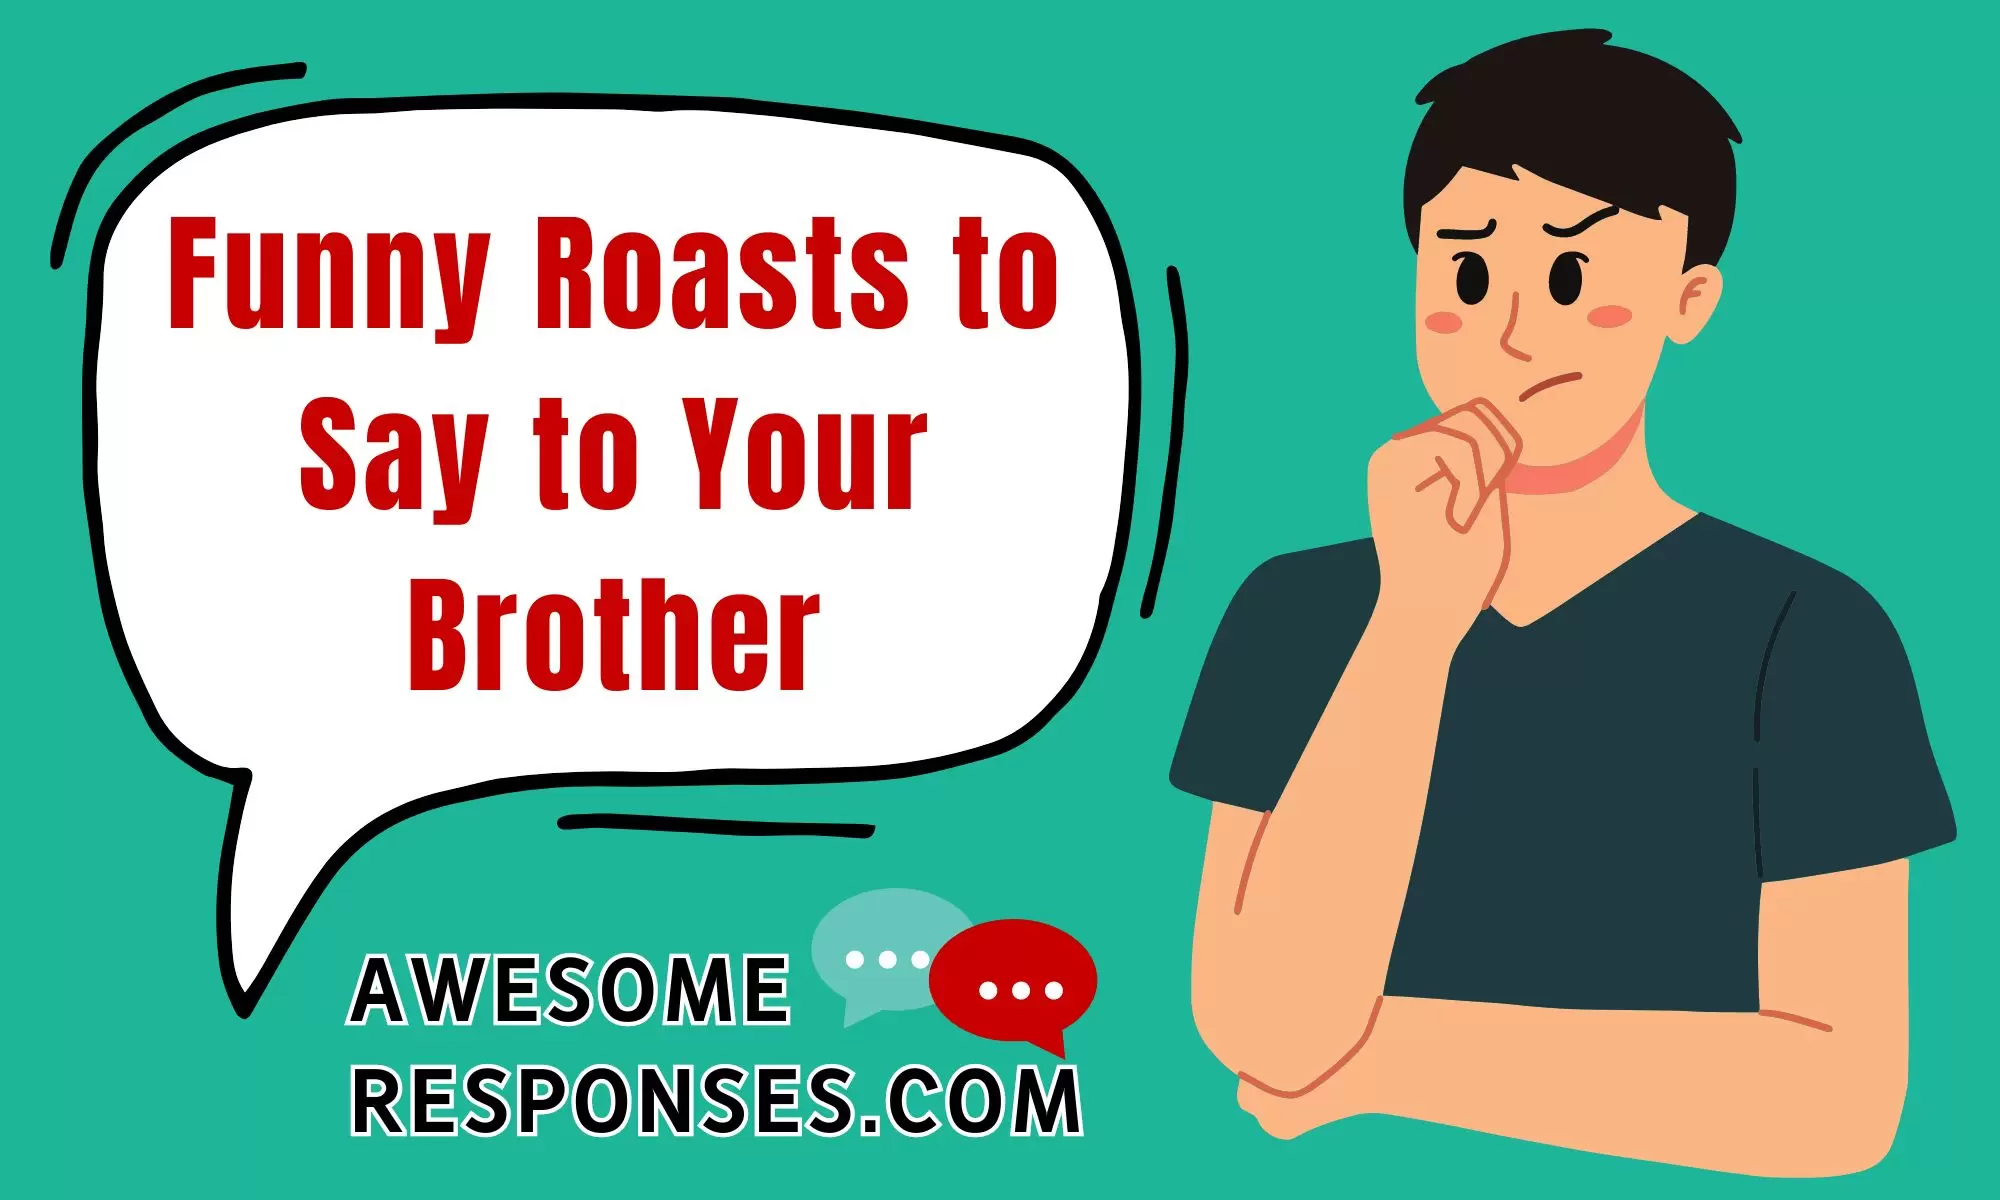 Funny Roasts to Say to Your Brother